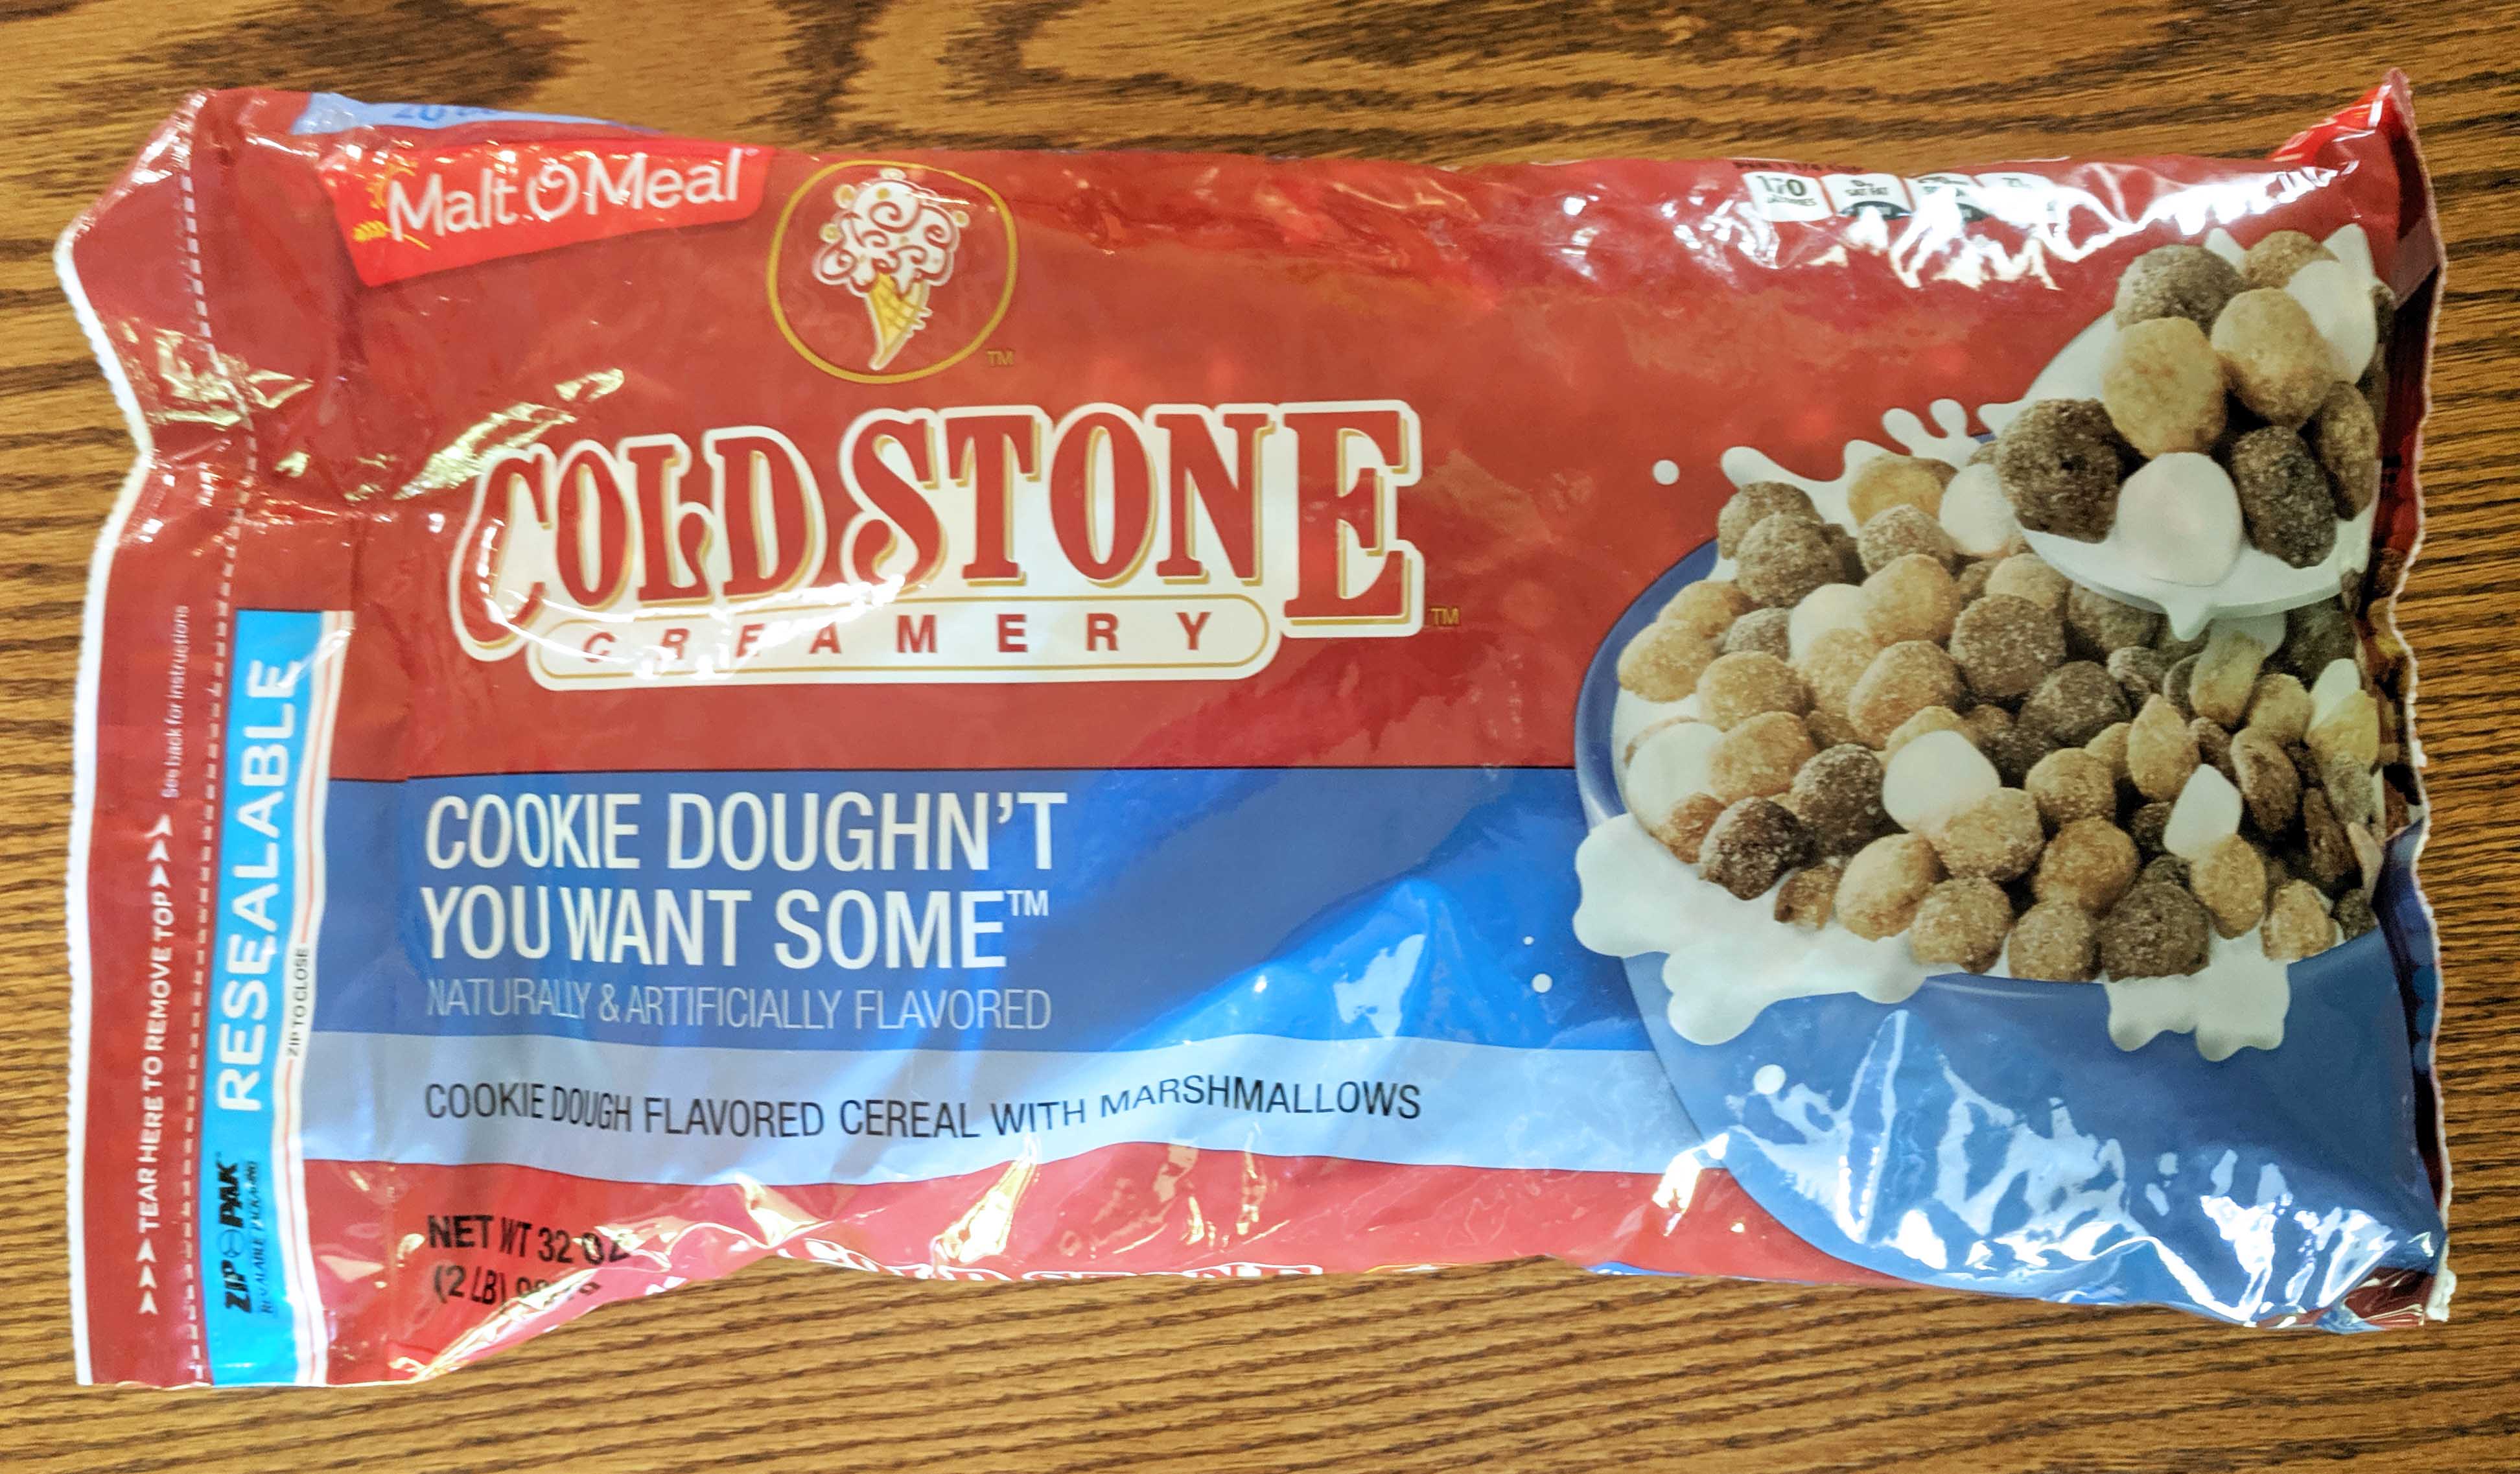 review-malt-o-meal-cold-stone-creamery-s-cookie-doughn-t-you-want